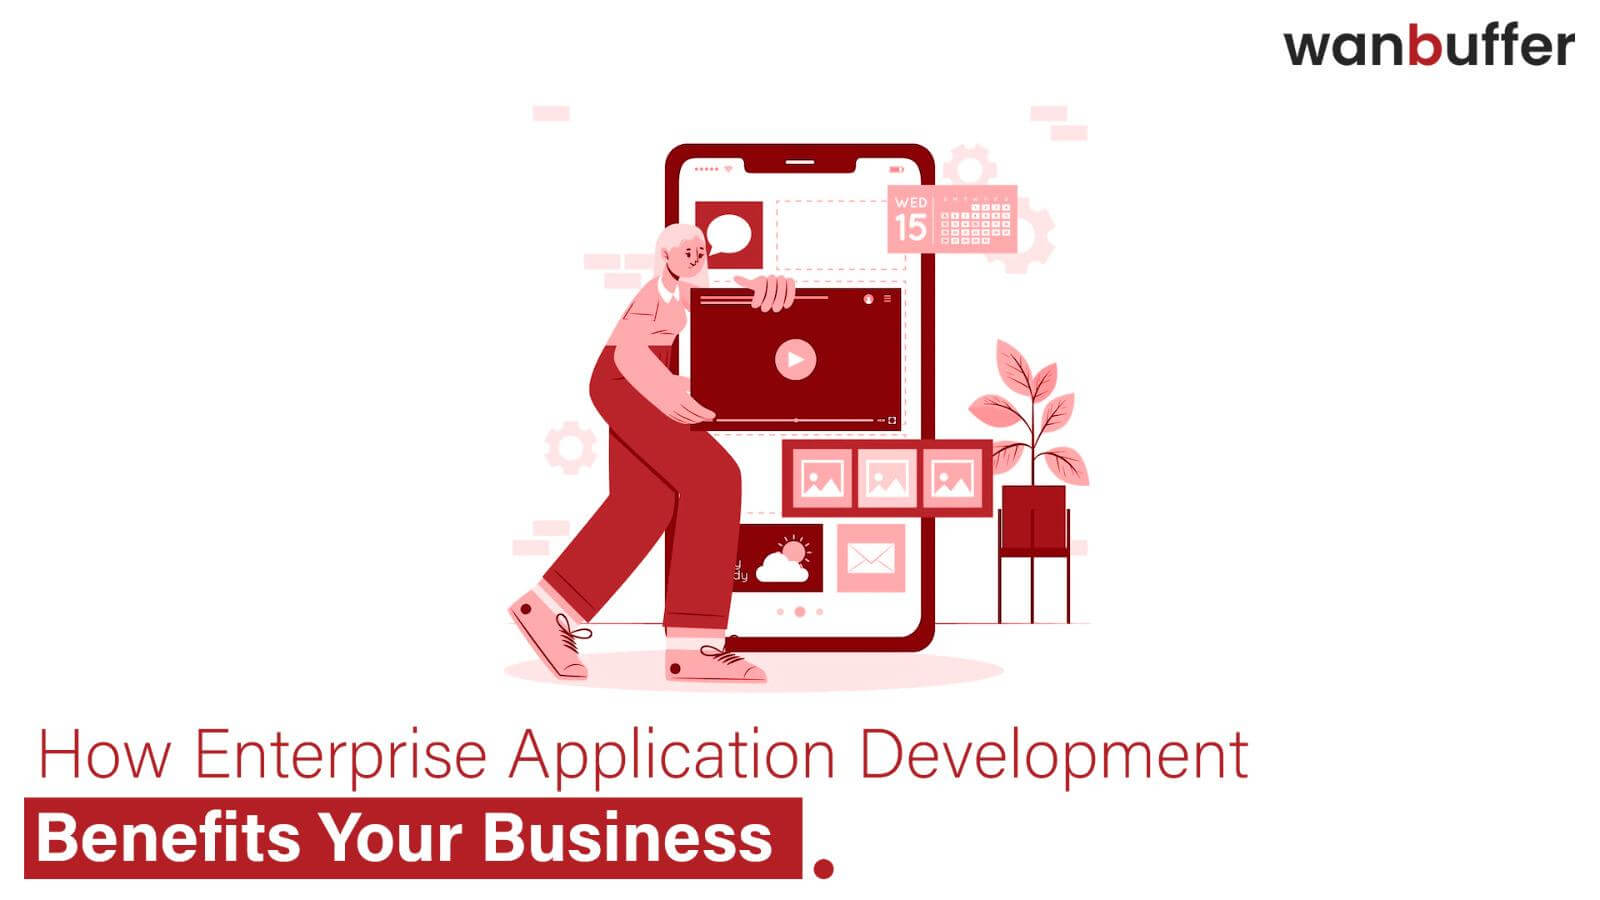 How Developing Enterprise Applications Can Help Your Business 